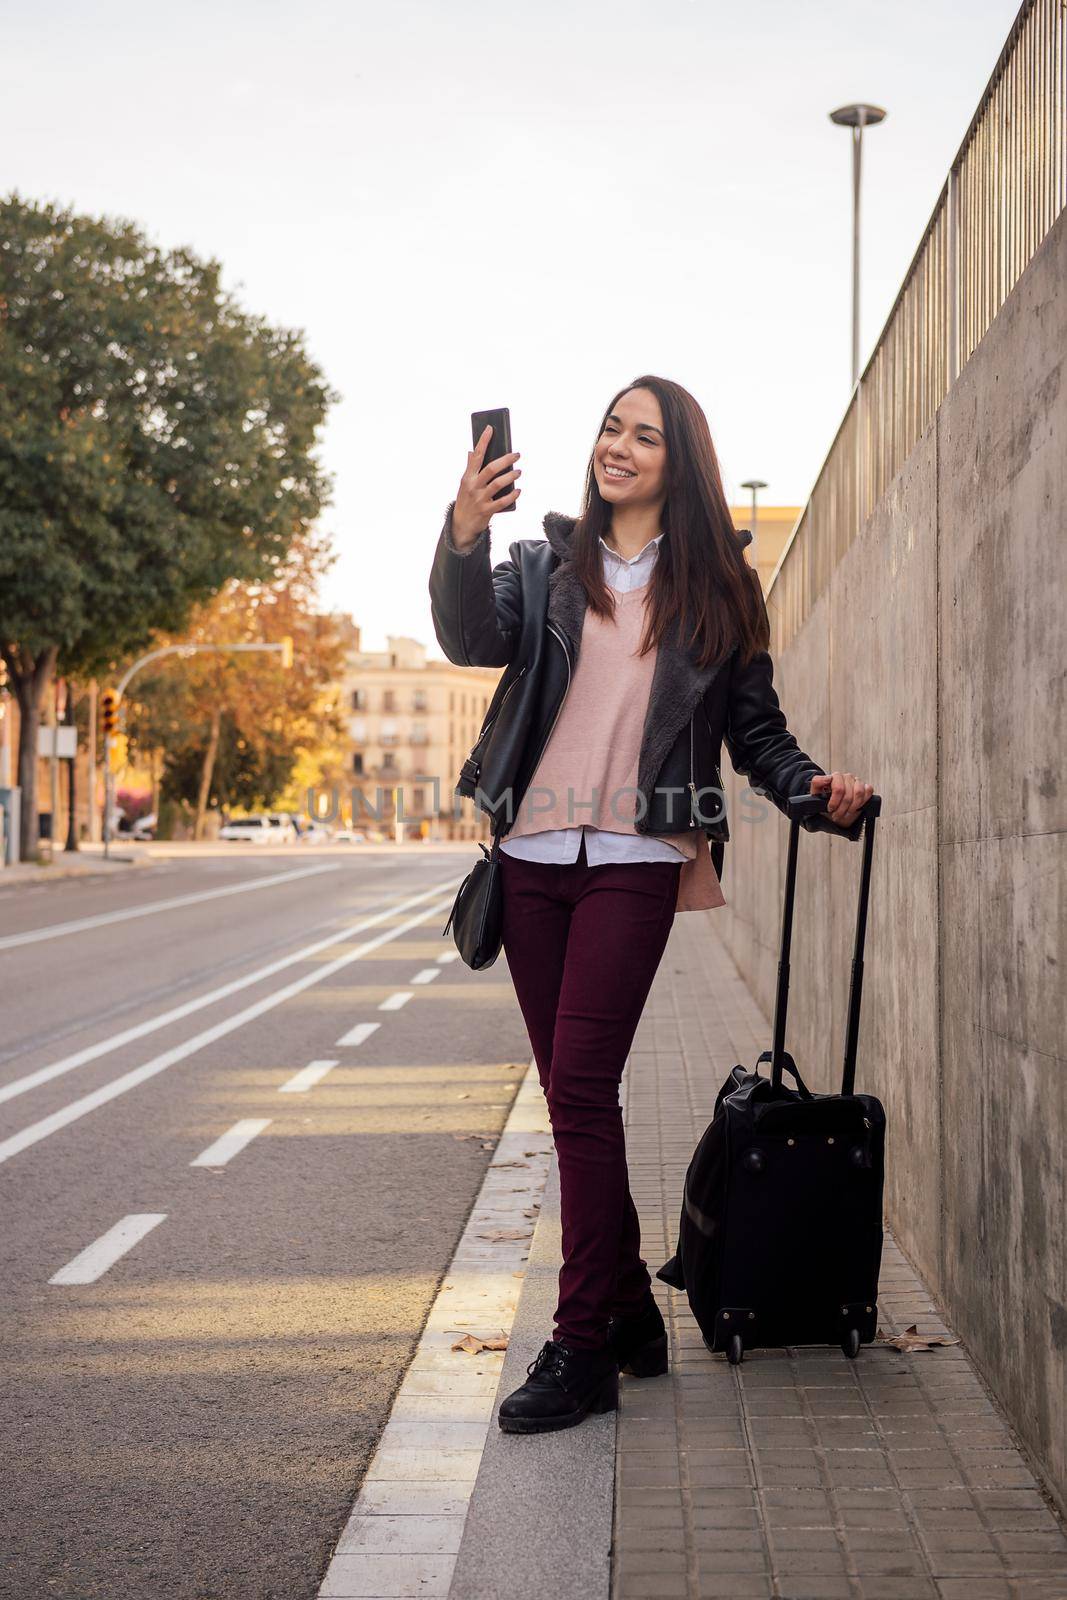 smiling young woman with suitcase waiting for a cab on the street while making a video call with her phone, concept of travel and technology, copyspace for text